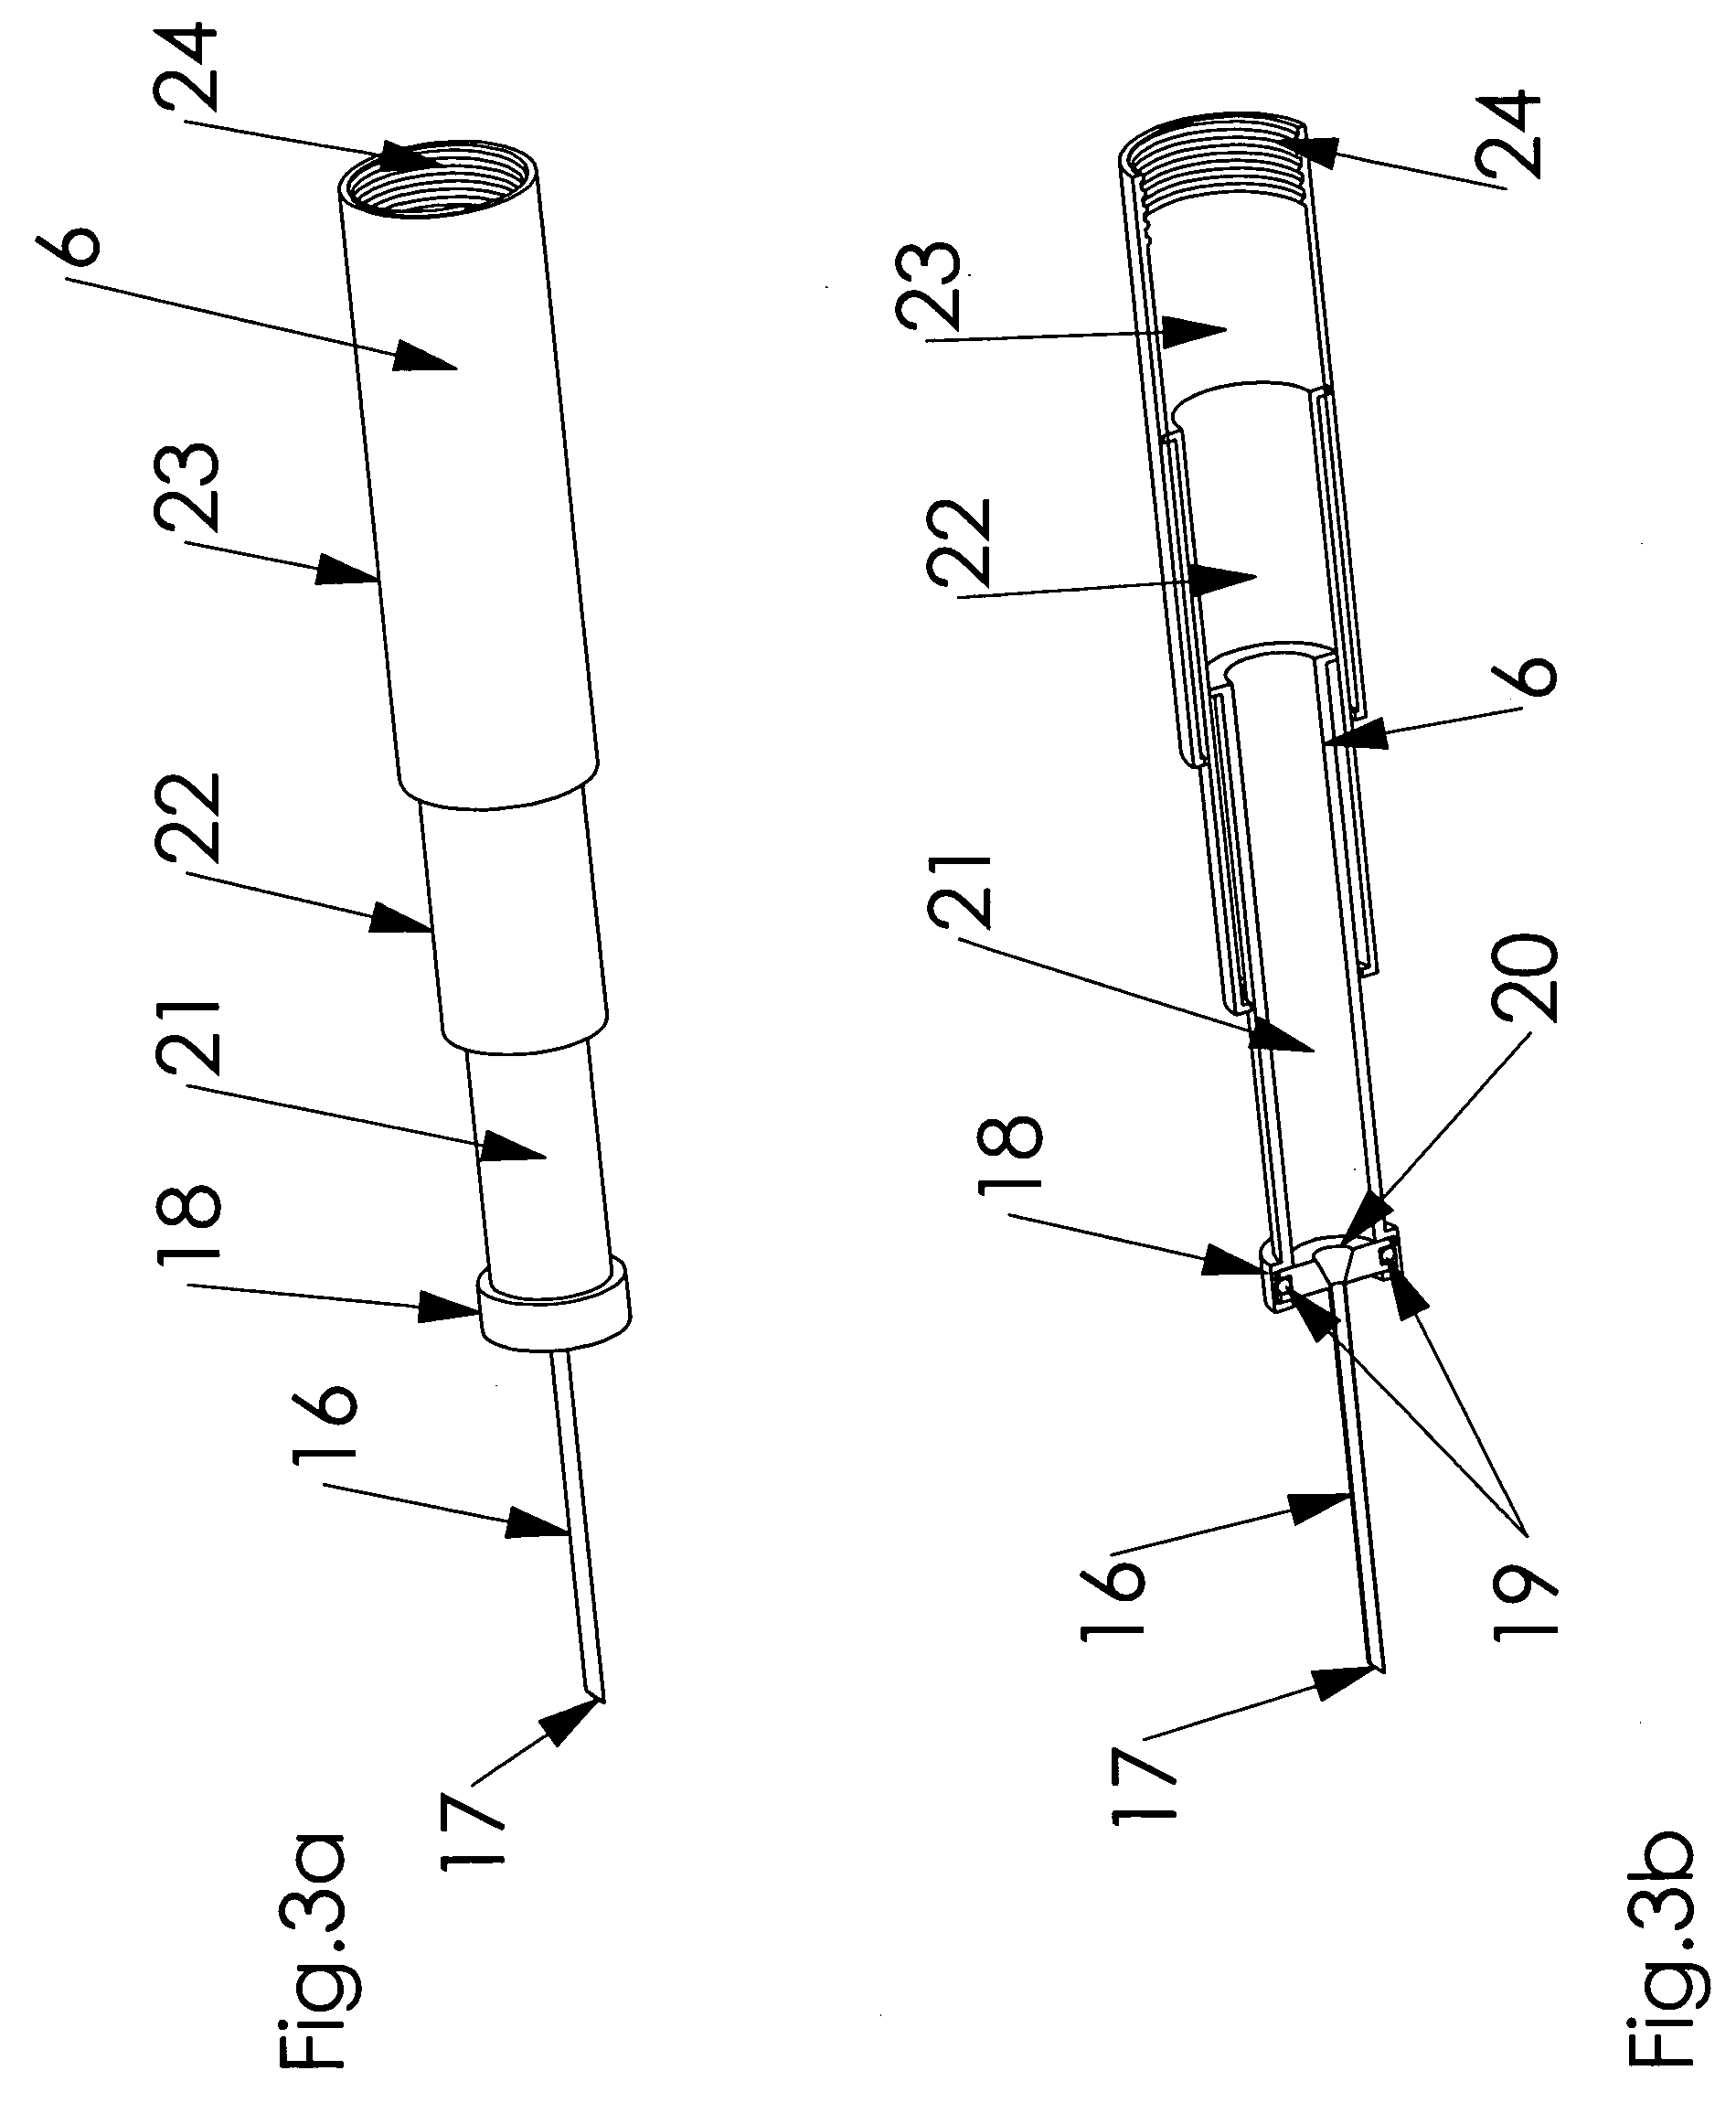 Multi-purpose minimally invasive instrument that uses a micro entry port